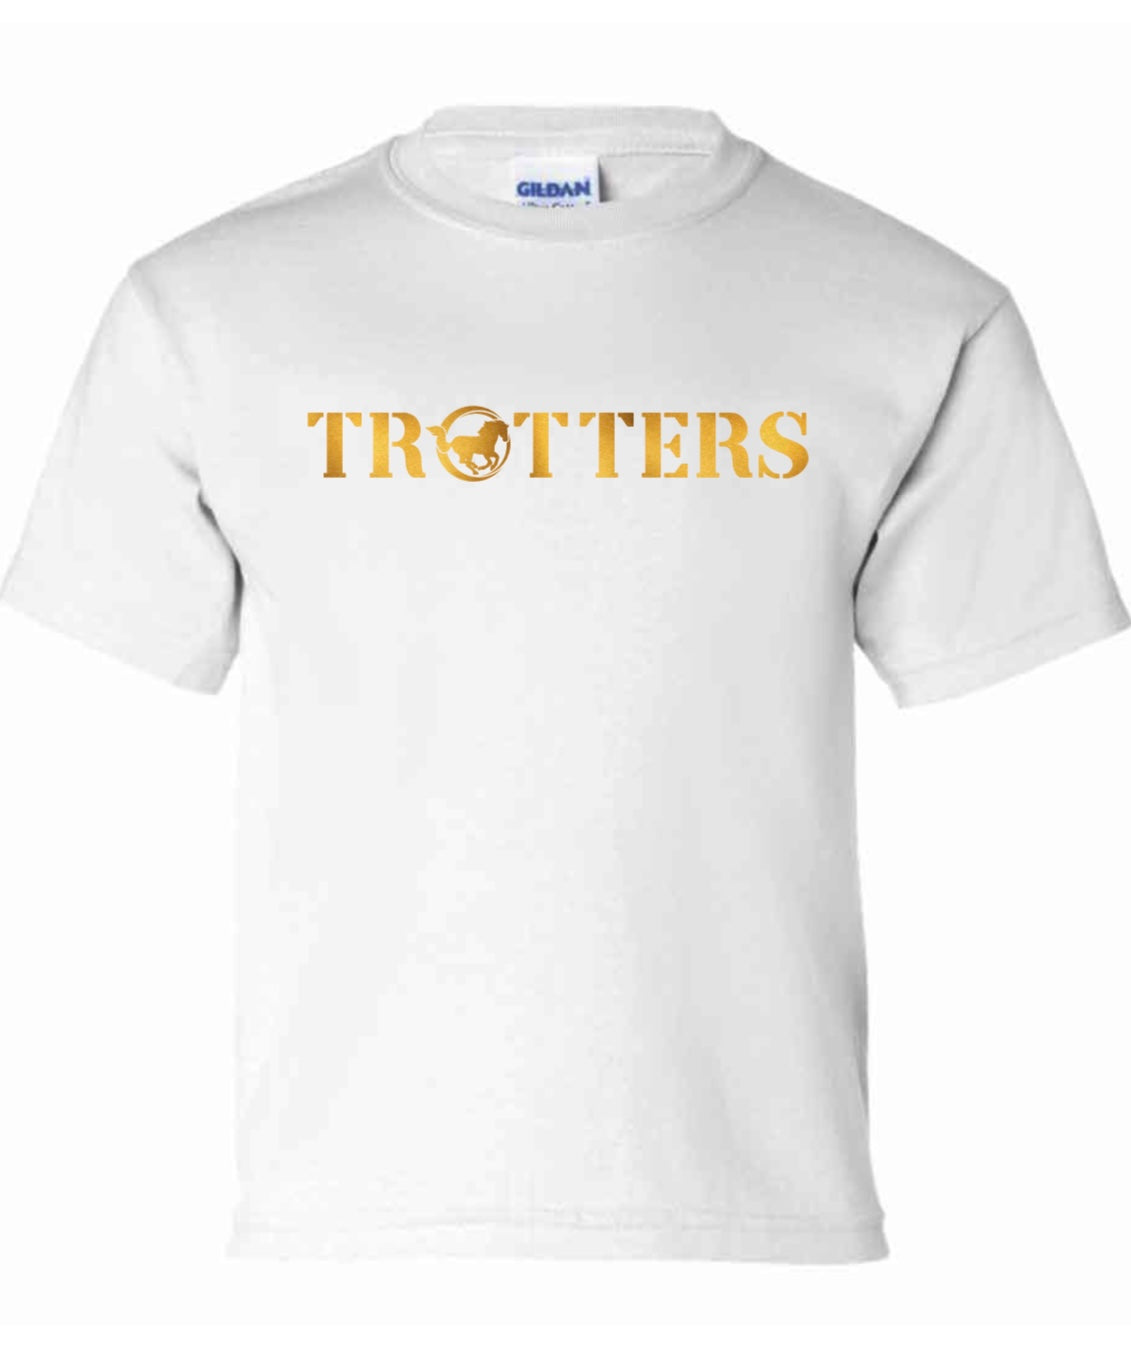 TROTTERS ARMY NCA TEE